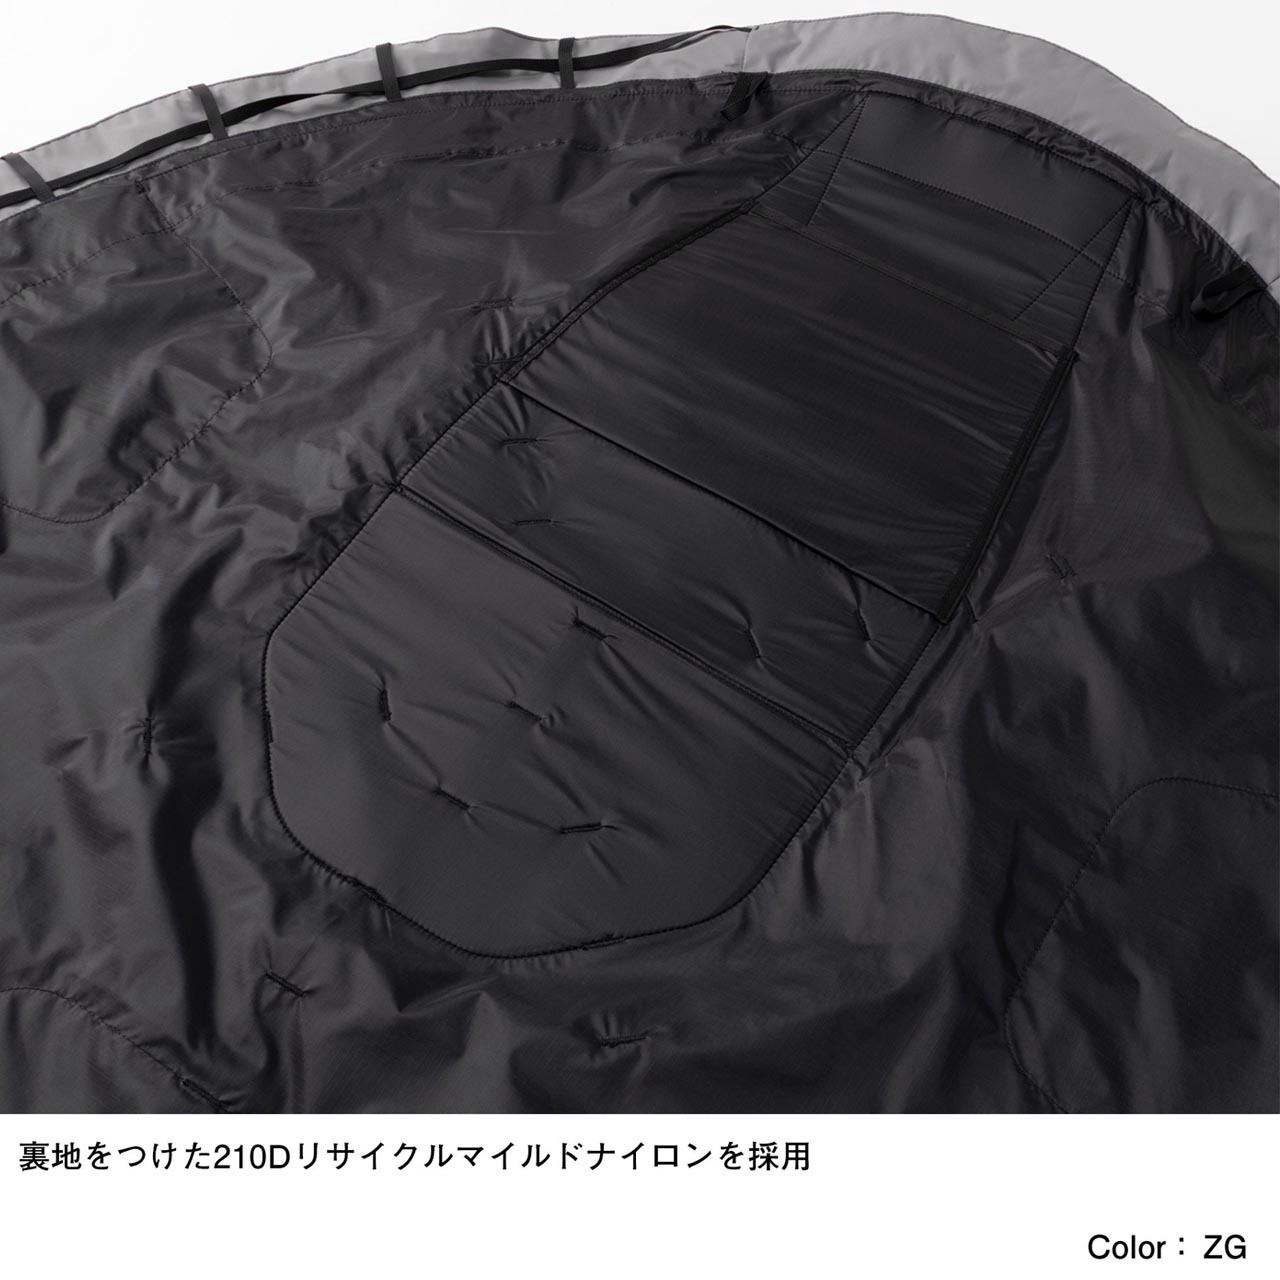 THE NORTH FACE [ザ・ノース・フェイス] Escape Pack [NM82230]_f0051306_08000211.jpg